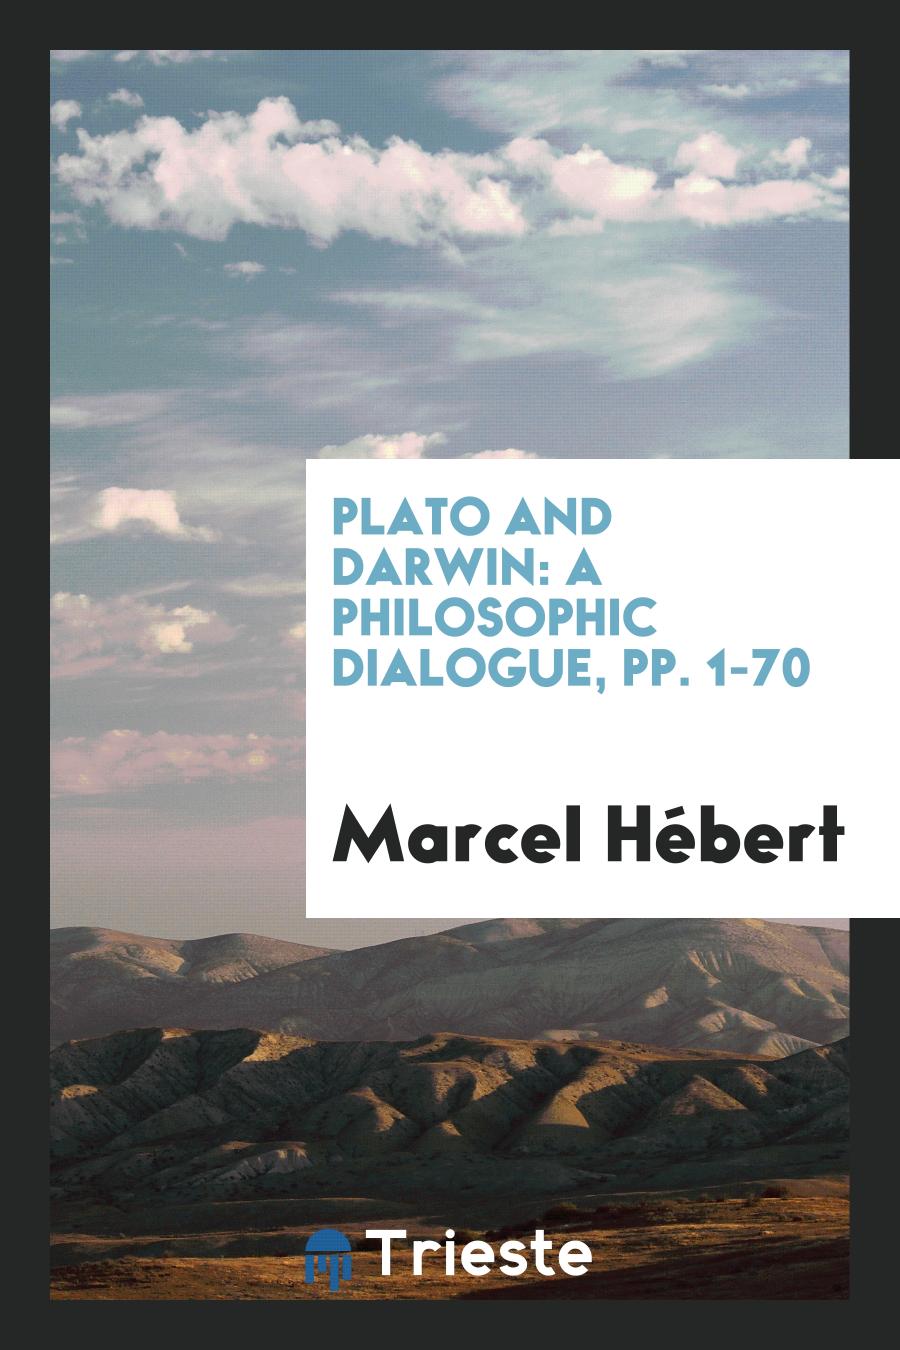 Plato and Darwin: A Philosophic Dialogue, pp. 1-70